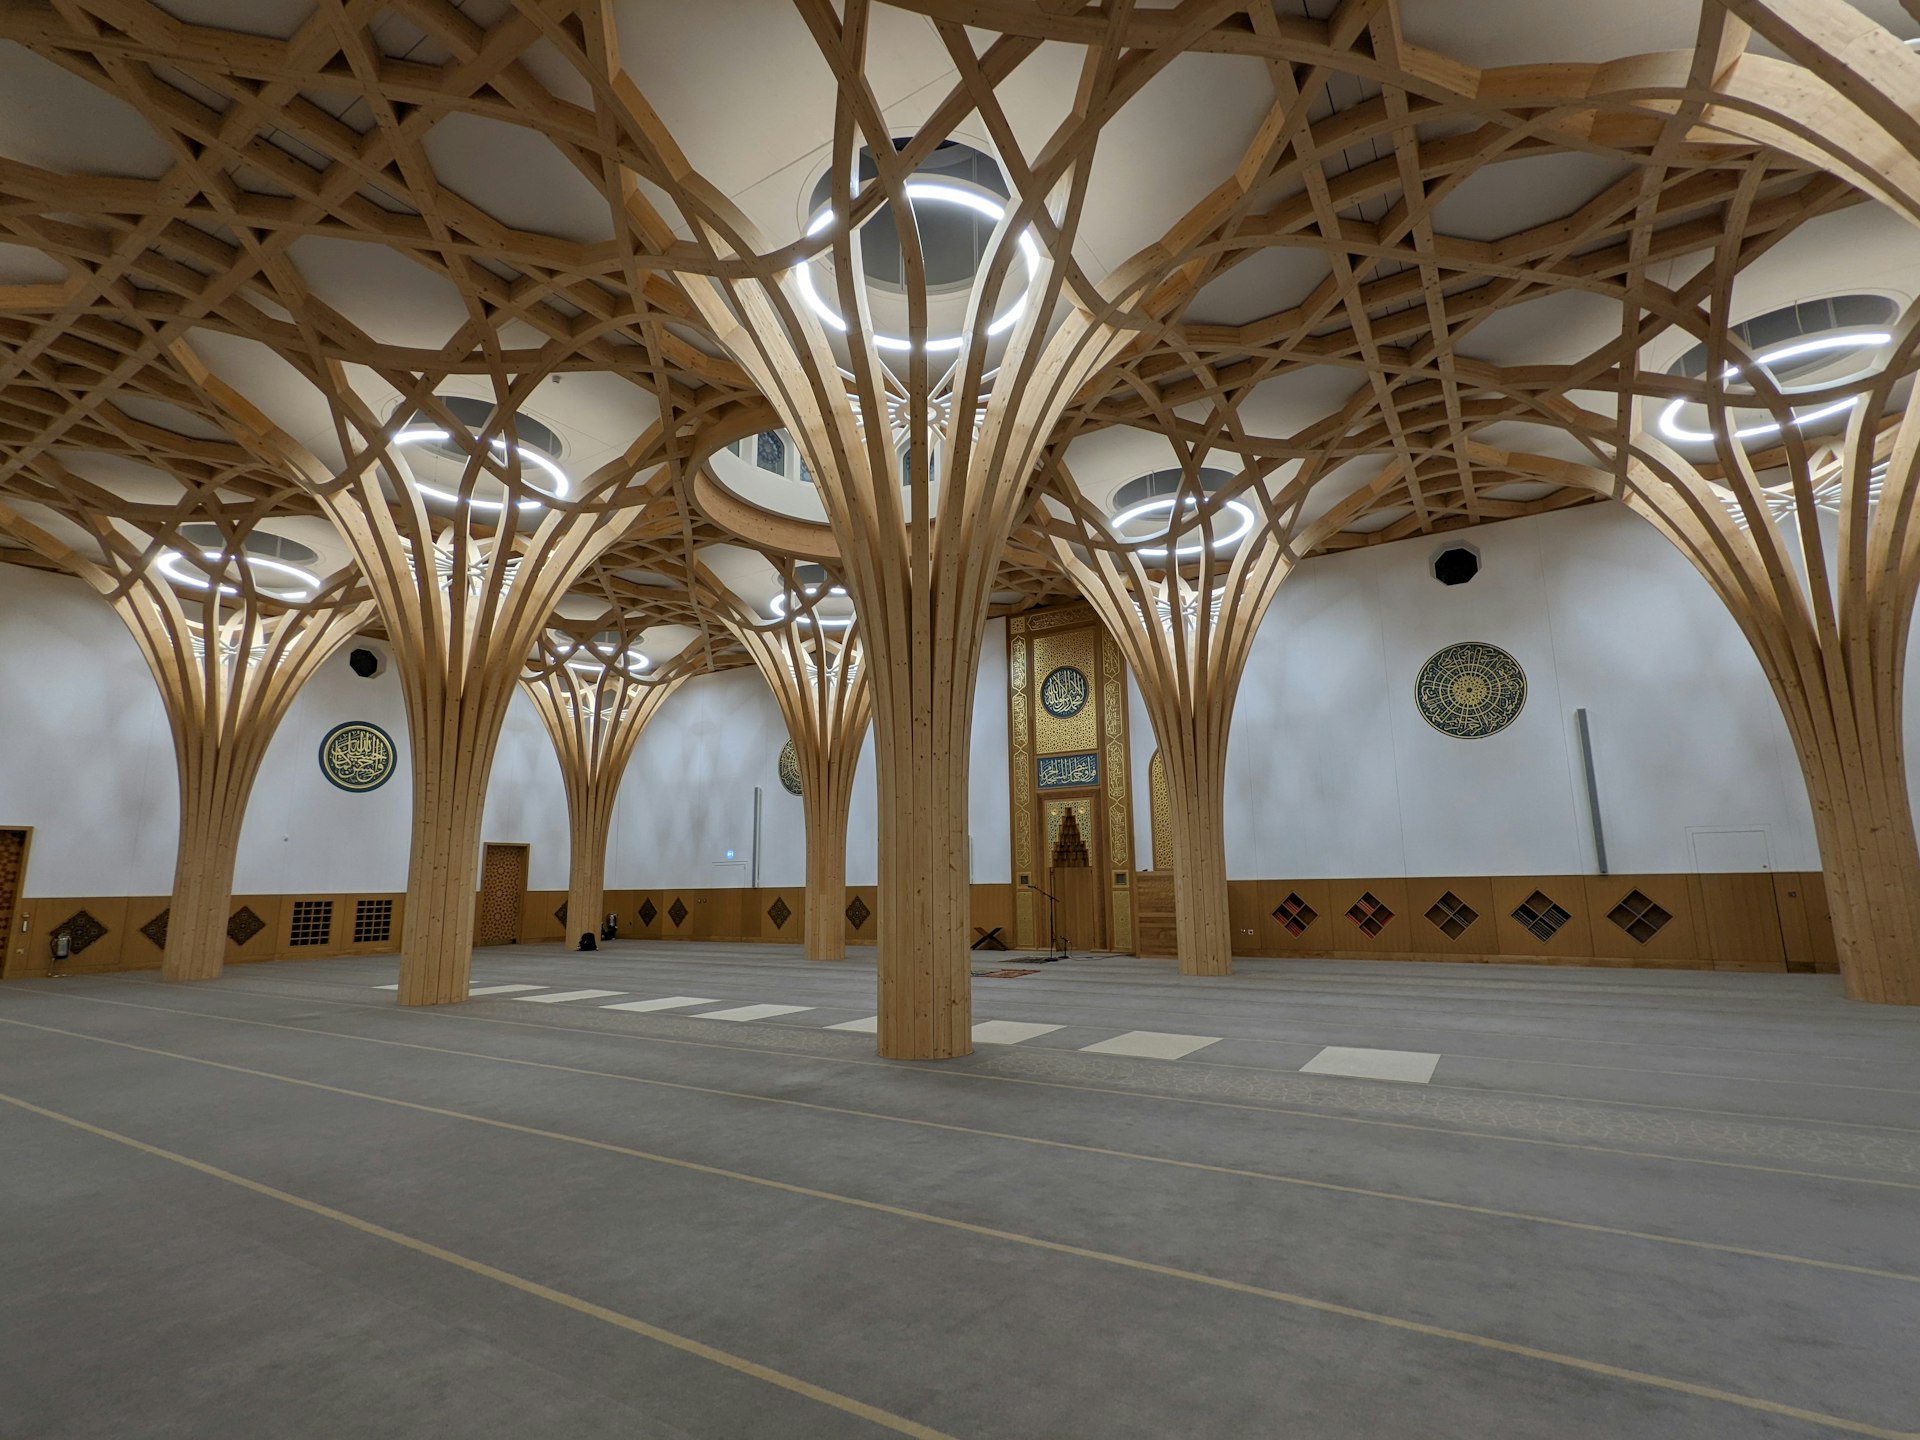 A large open space in a mosque with large arched wooden pillars leading to a light-filled space